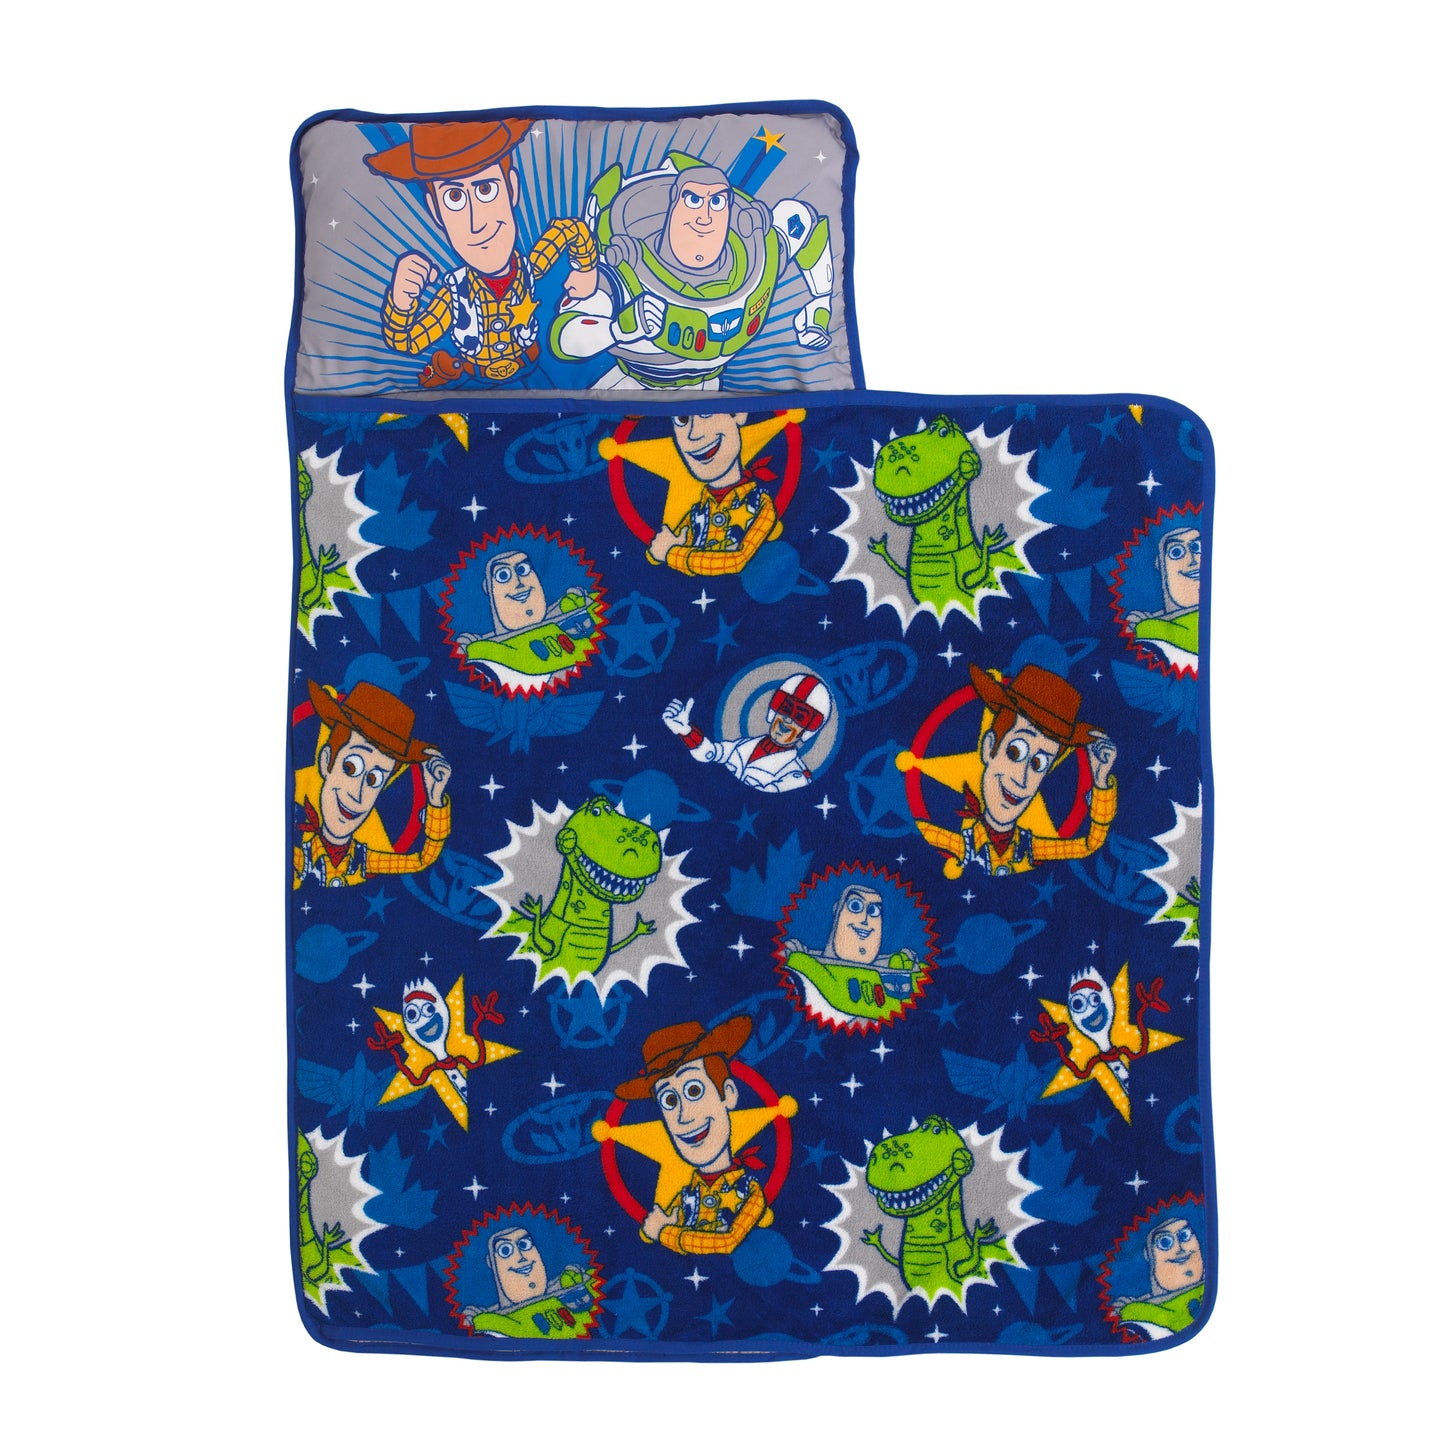 Disney Toy Story 4  - Blue, Green, Yellow, Grey Toys in Action Toddler Nap Mat